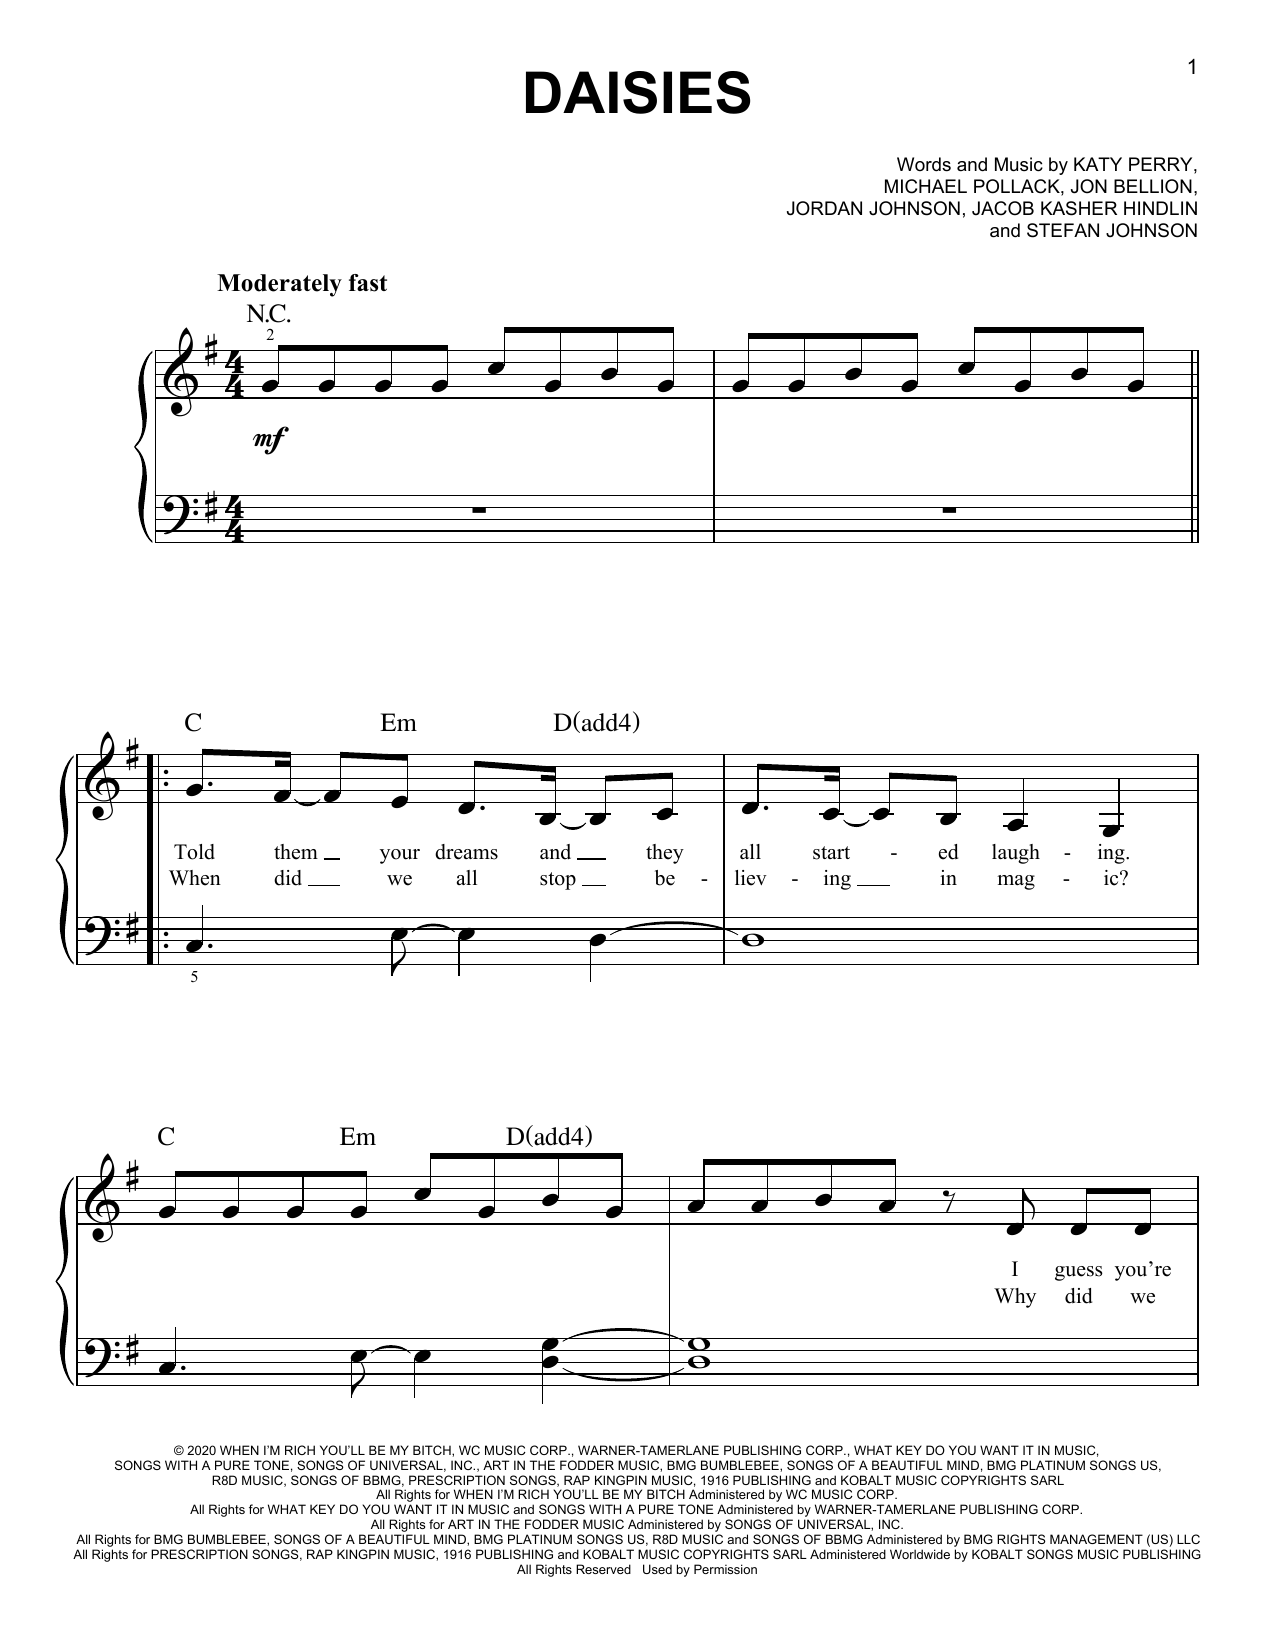 Download Katy Perry Daisies Sheet Music